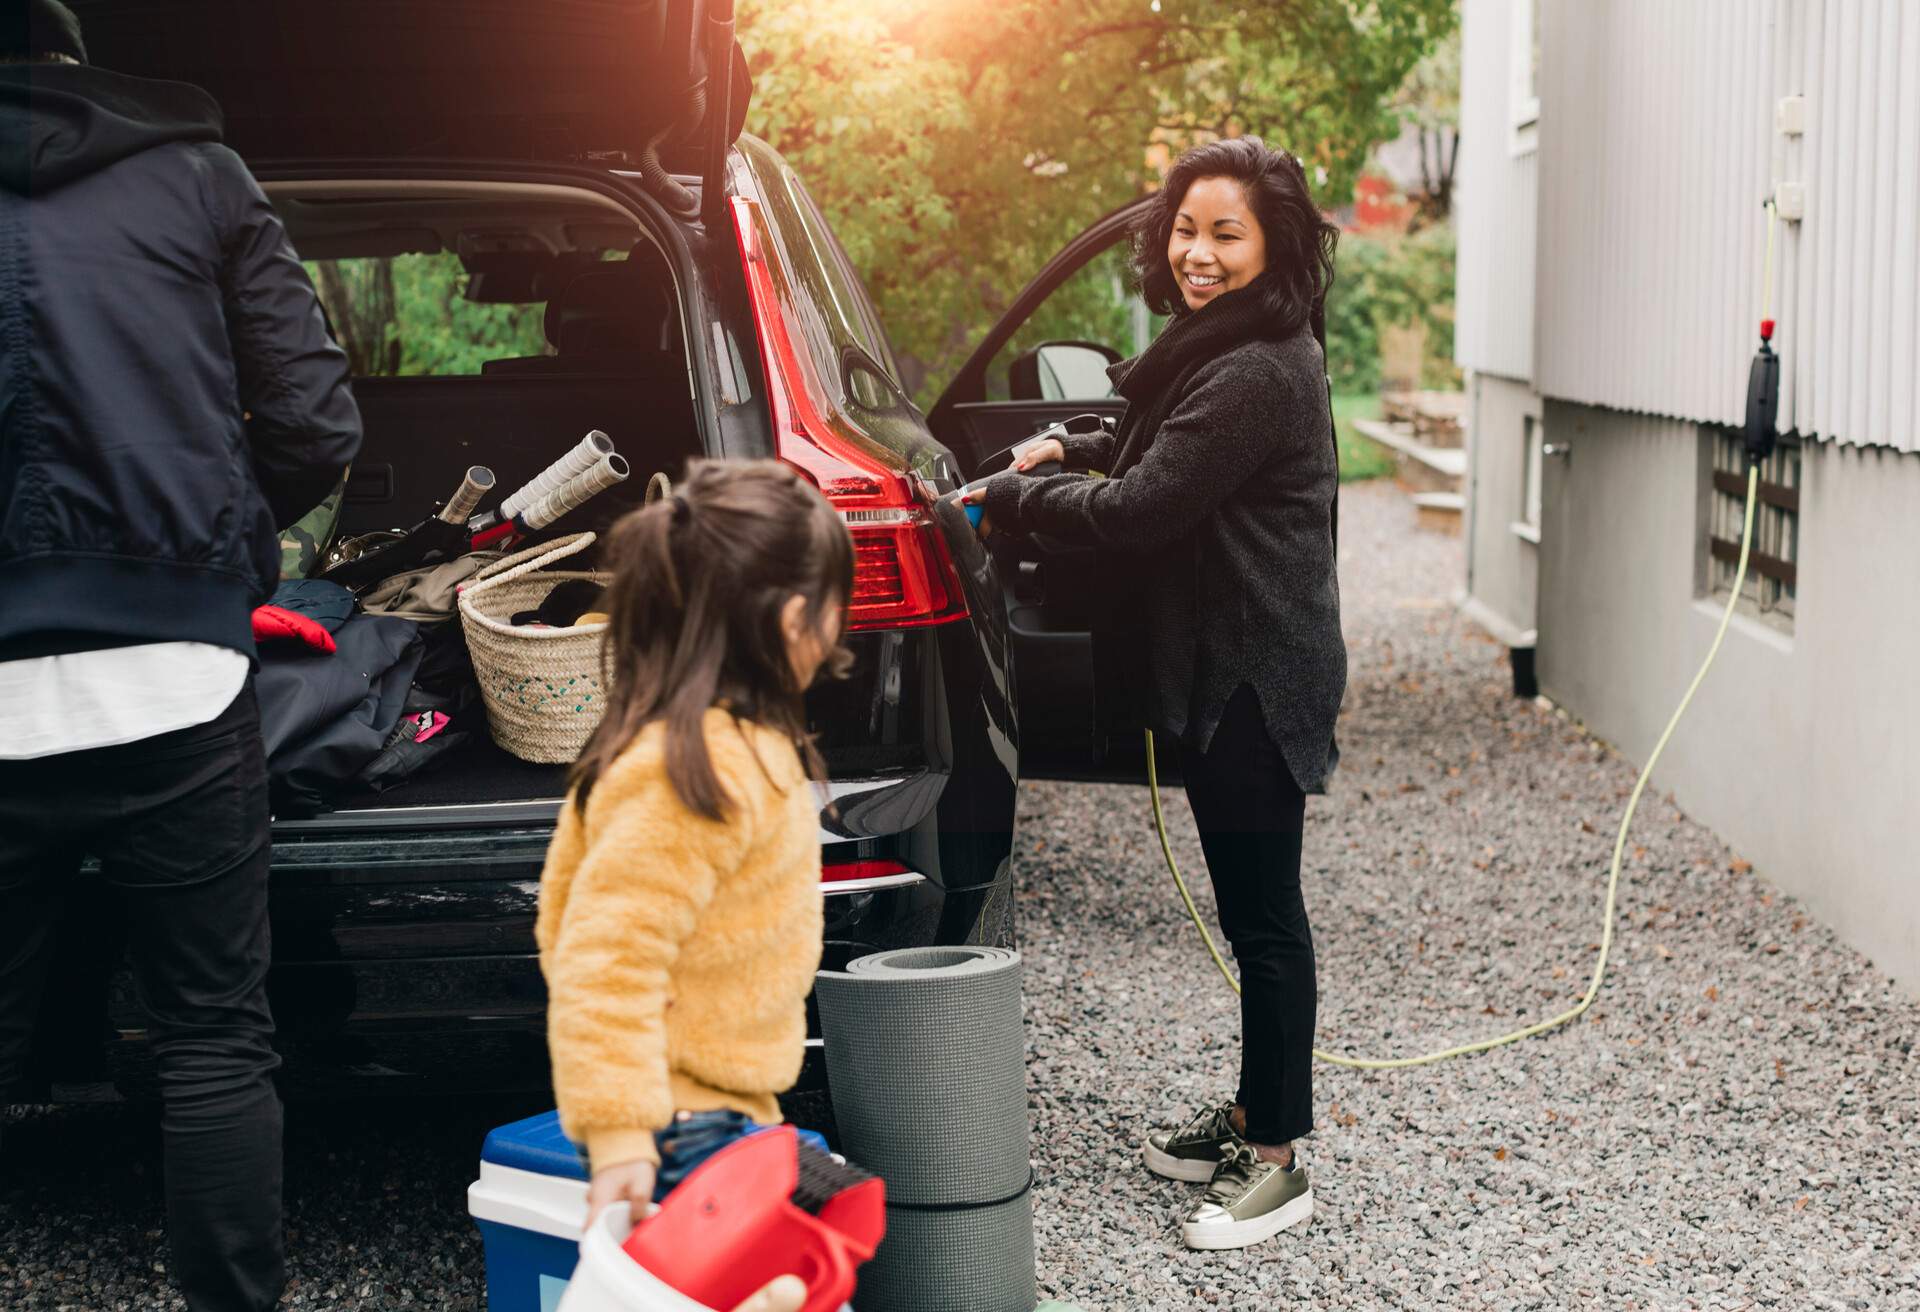 THEME_PEOPLE_PERSON_FAMILY_PARENT_CHILD_VACATION_TRAVEL_CAR_LUGGAGE_SUITCASE_RENTAL_ELECTRIC-CAR-shutterstock-portfolio_1875249034